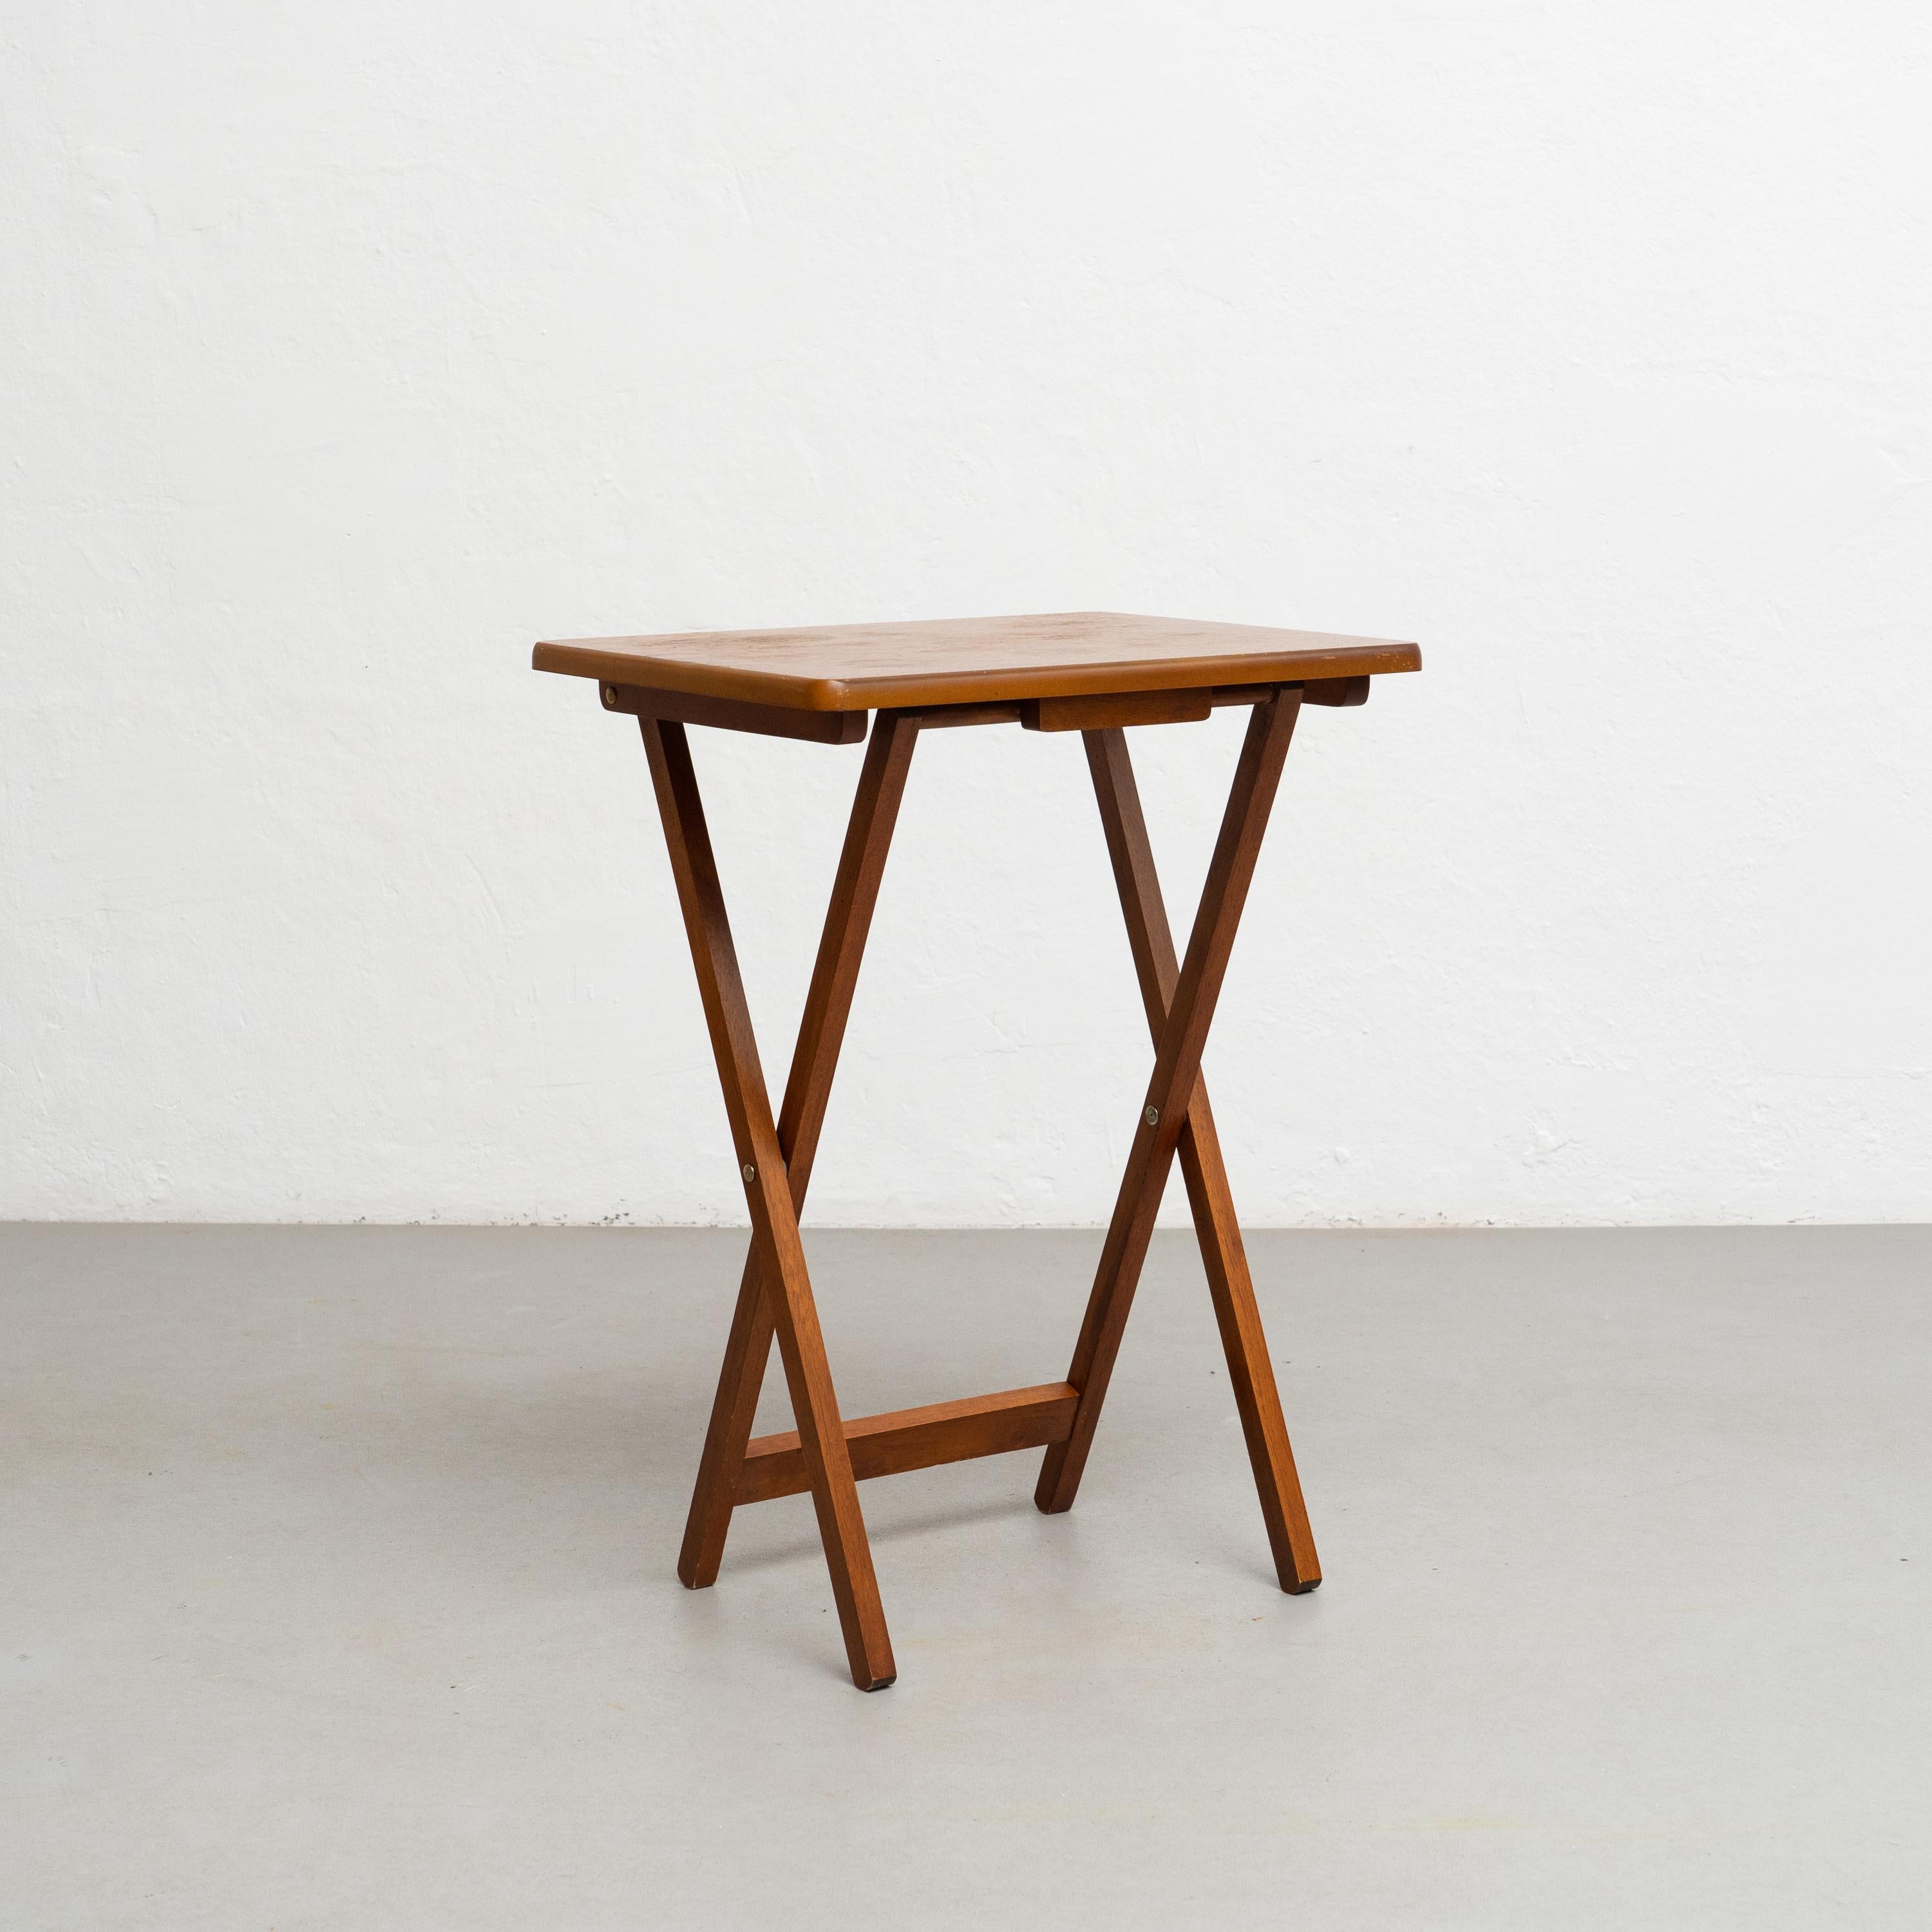 Folding wood Table, circa 1960.

By unknown artisan in Spain, circa 1960.

In good original condition, with minor wear consistent with age and use, preserving a beautiful patina.

Materials:
Wood.